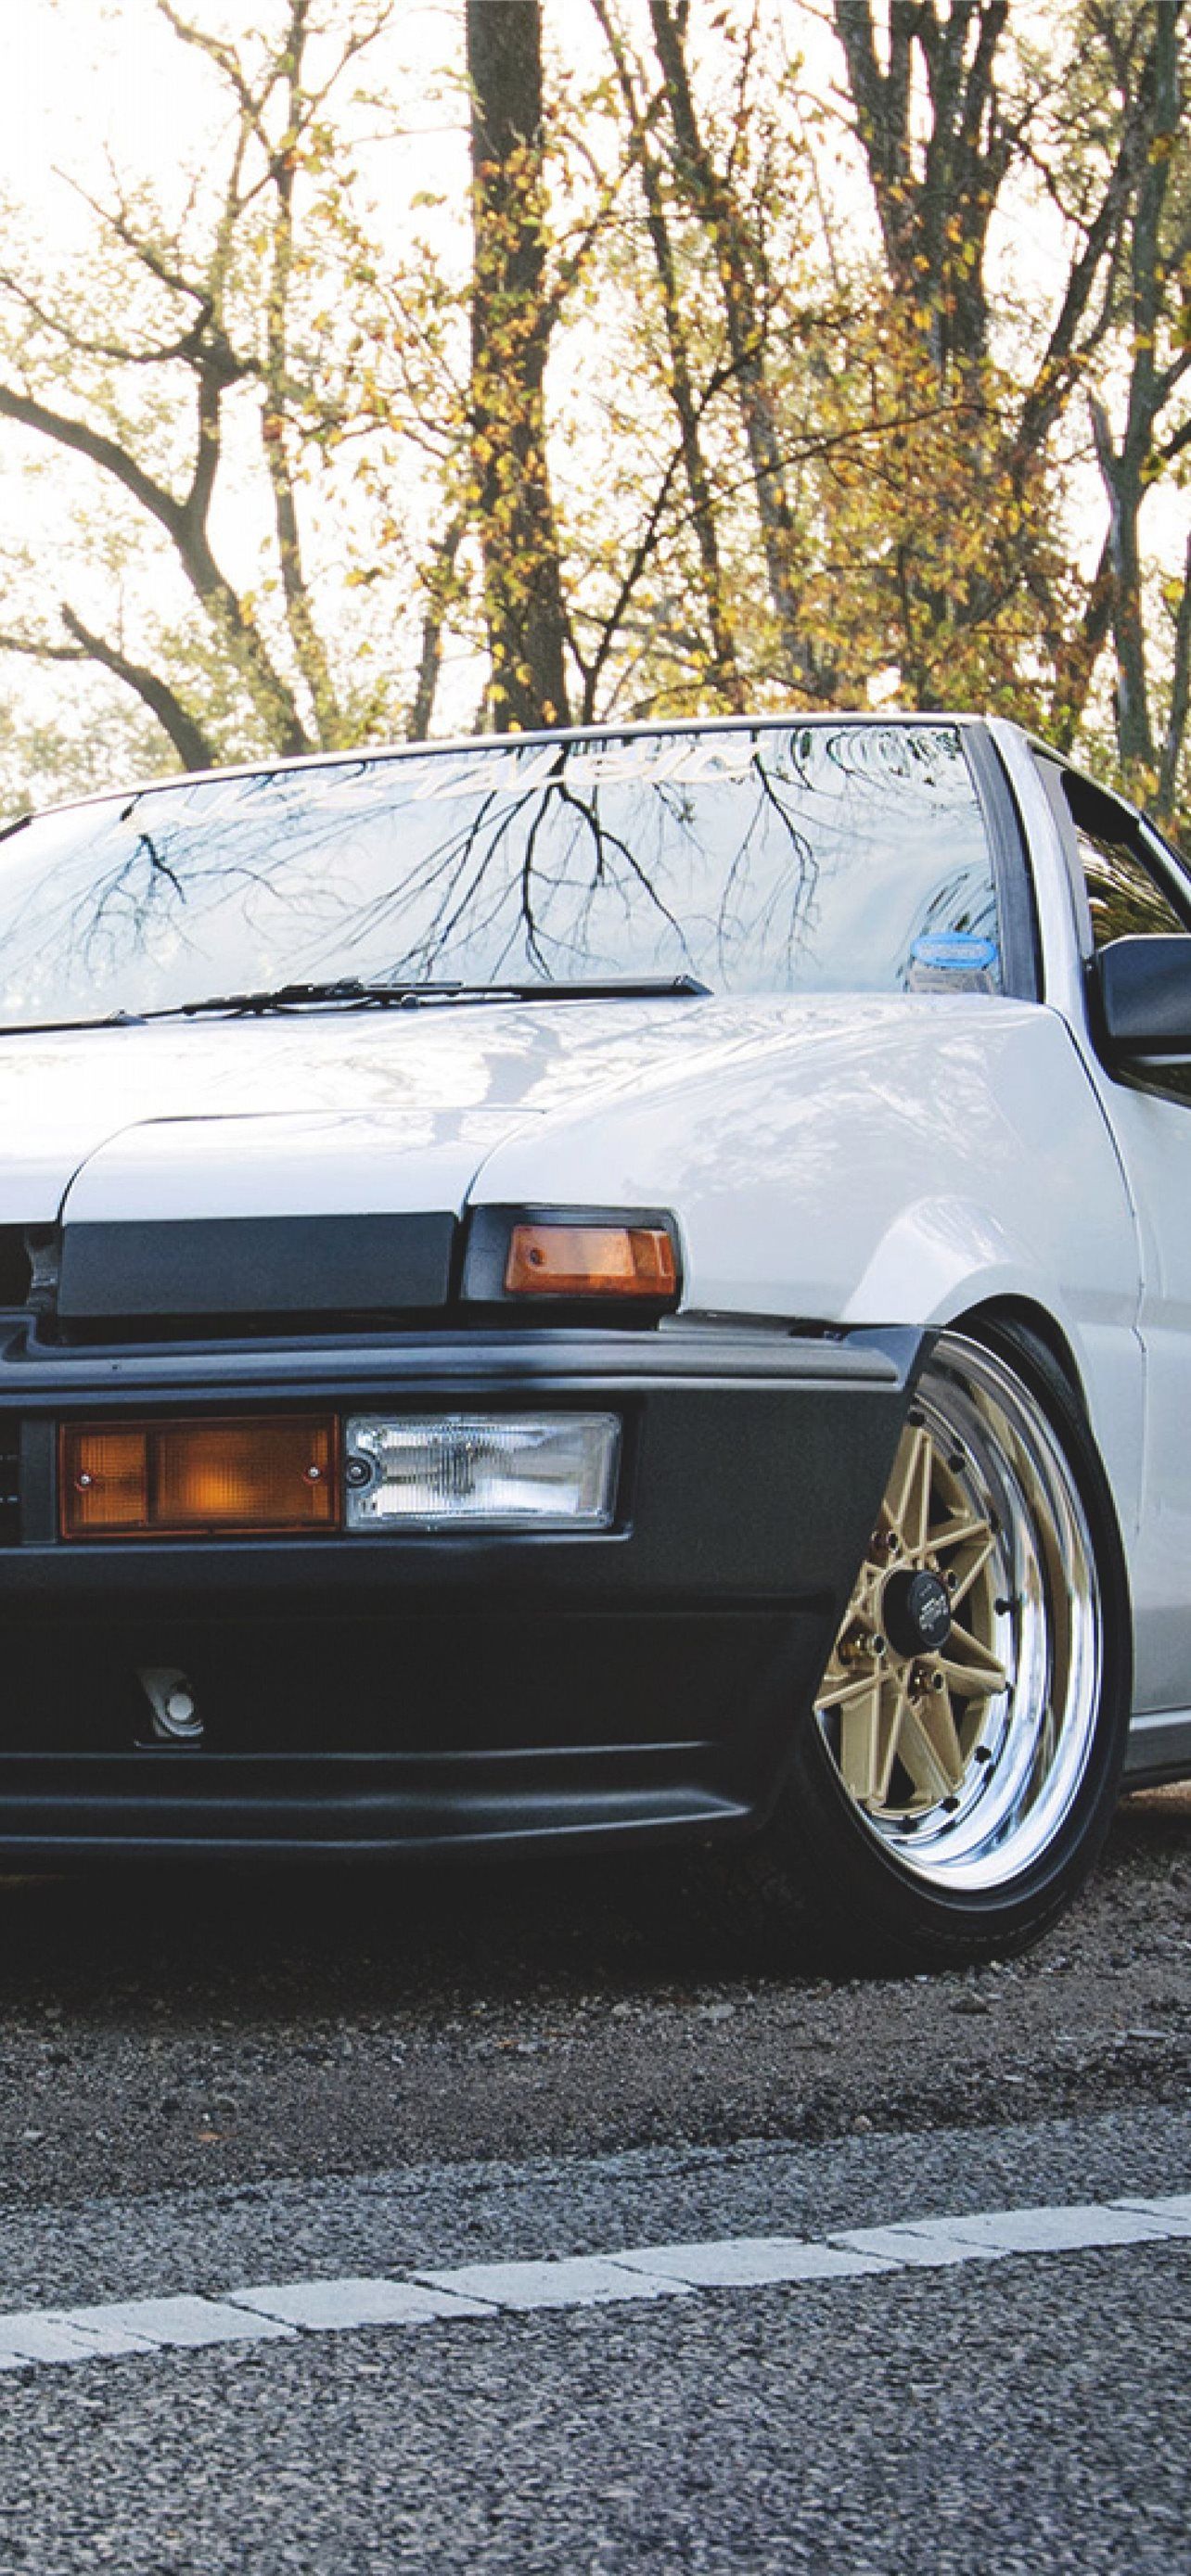 Free download toyota ae86 iPhone Wallpaper Free Download [1284x2778] for your Desktop, Mobile & Tablet. Explore Toyota Trueno Wallpaper. Toyota Celica Wallpaper, Toyota Supra Wallpaper, Toyota Tacoma Wallpaper